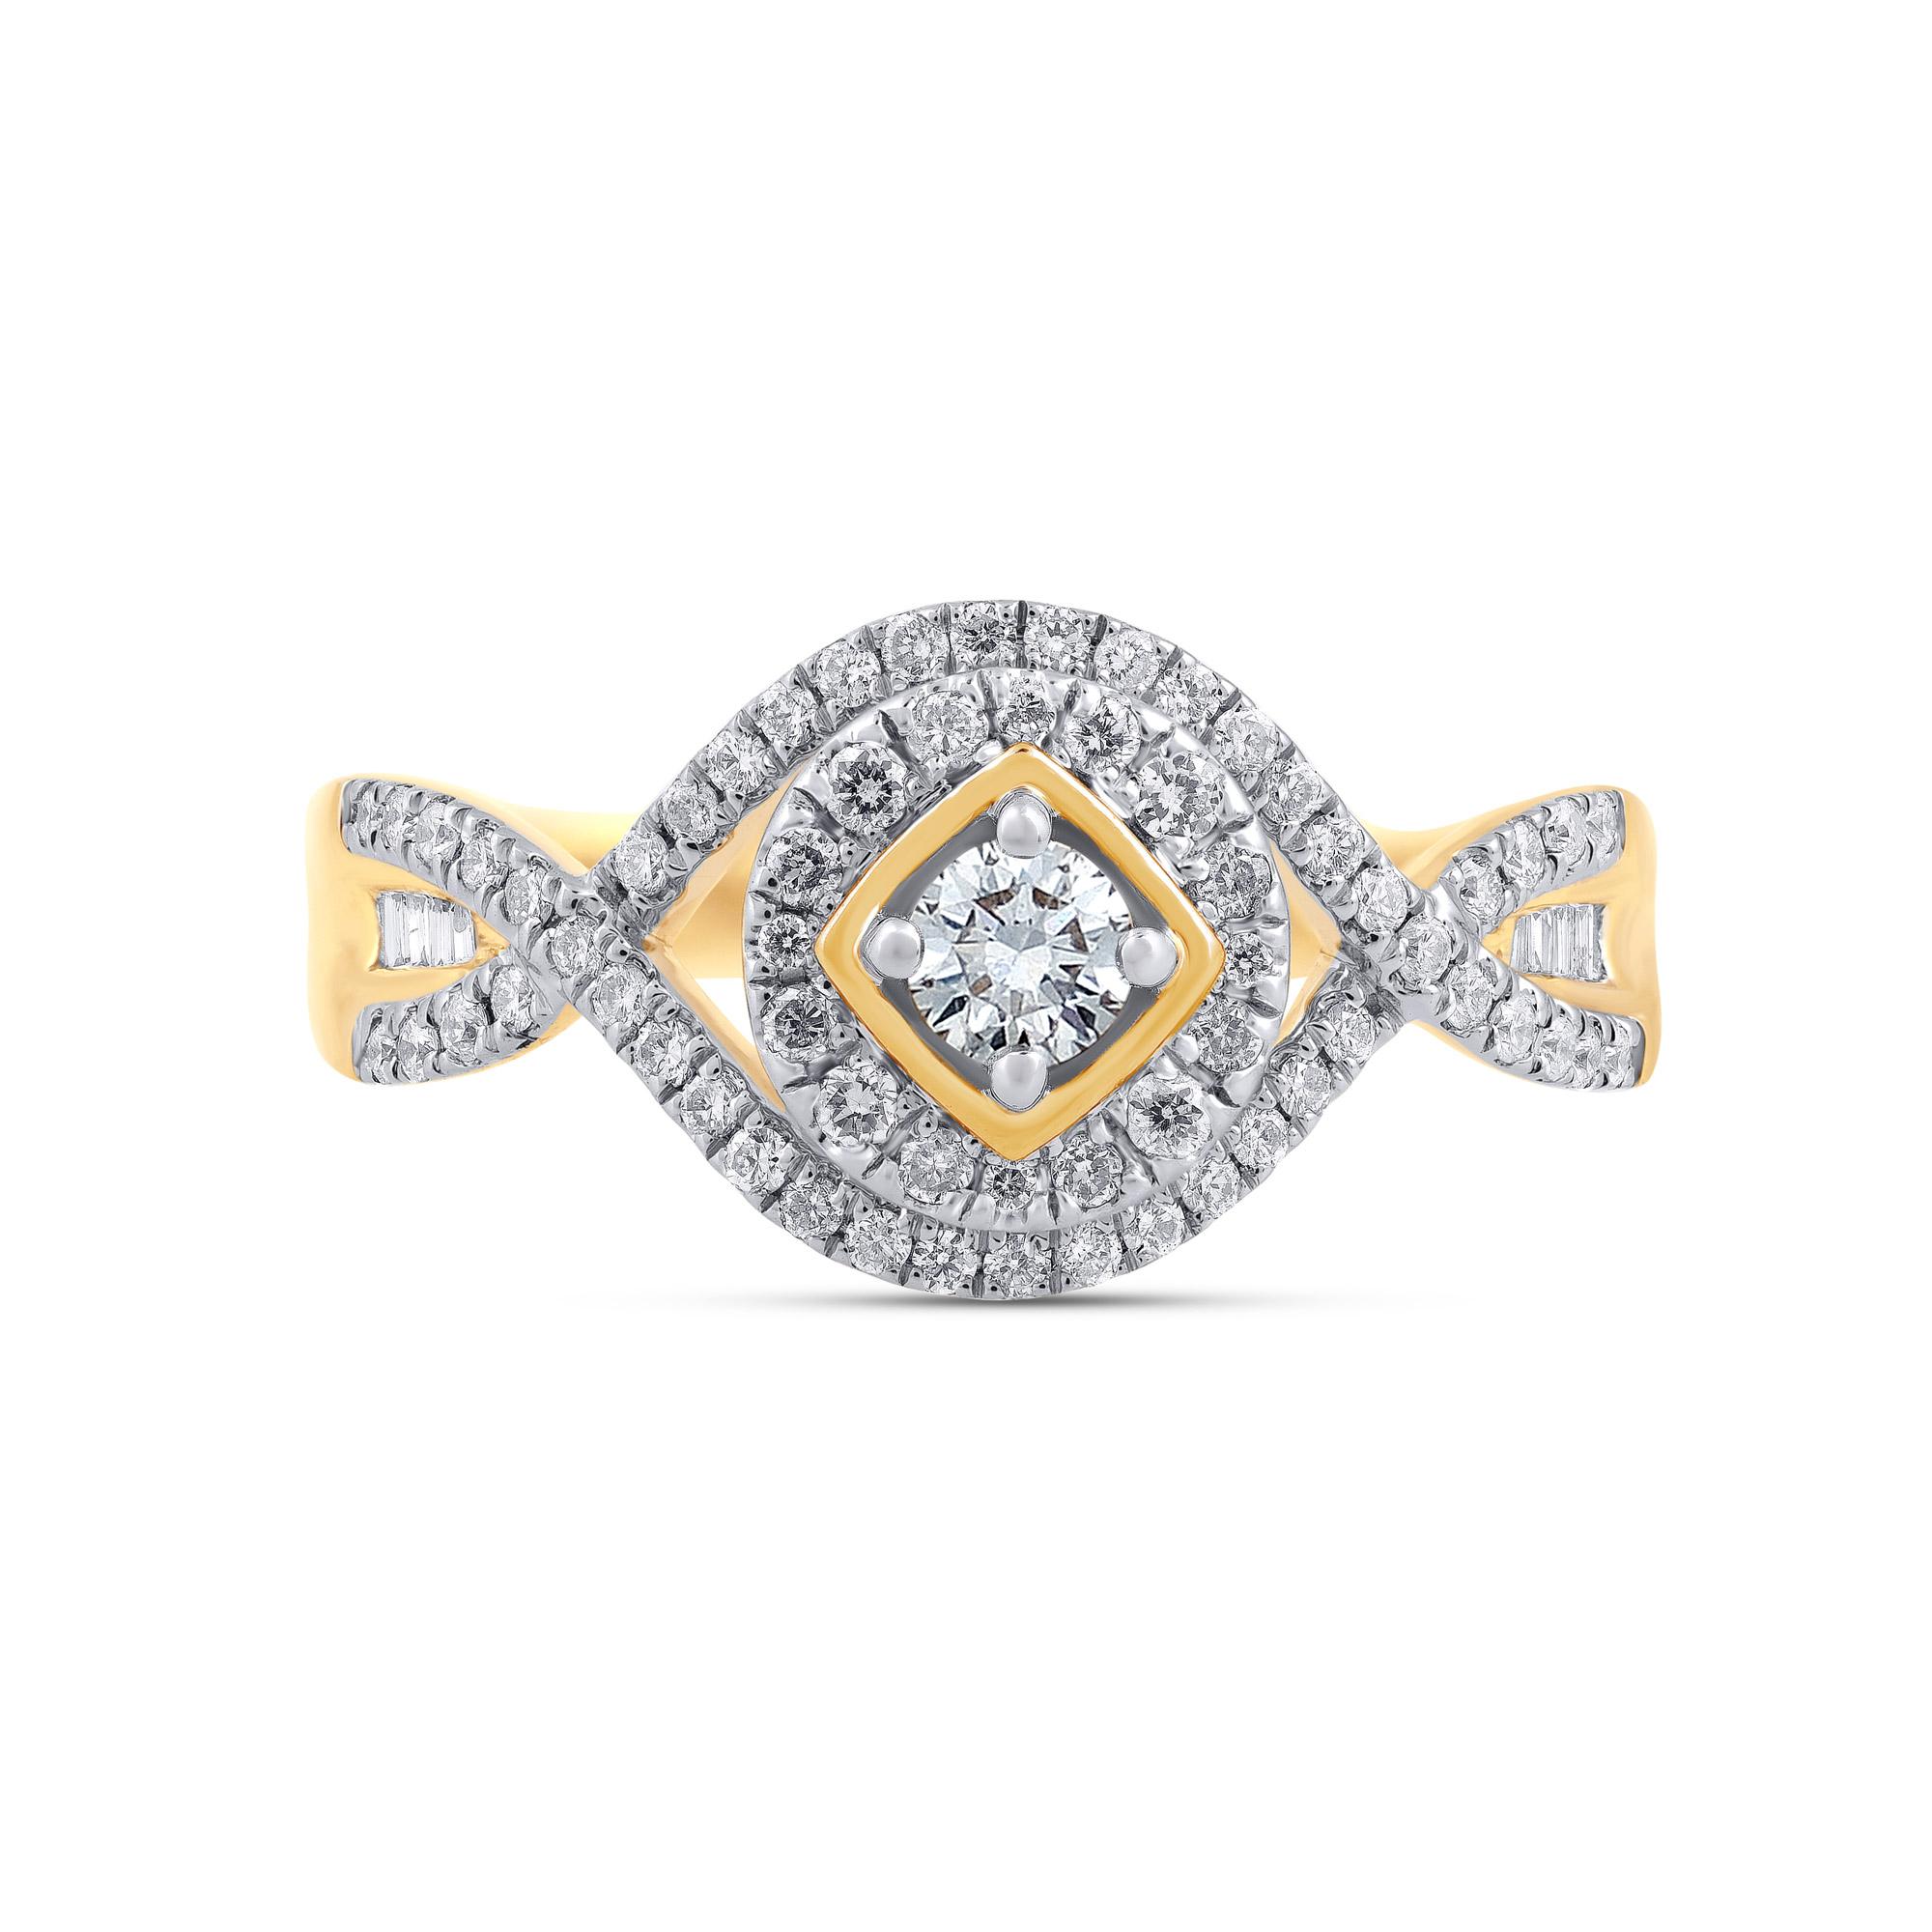 Give a touch of glamour to your fine jewelry collection with this diamond engagement ring. Crafted in 14KT yellow gold. This split shank ring is studded with 71 single cut, brilliant cut round and baguette diamonds in prong, pave & channel setting,